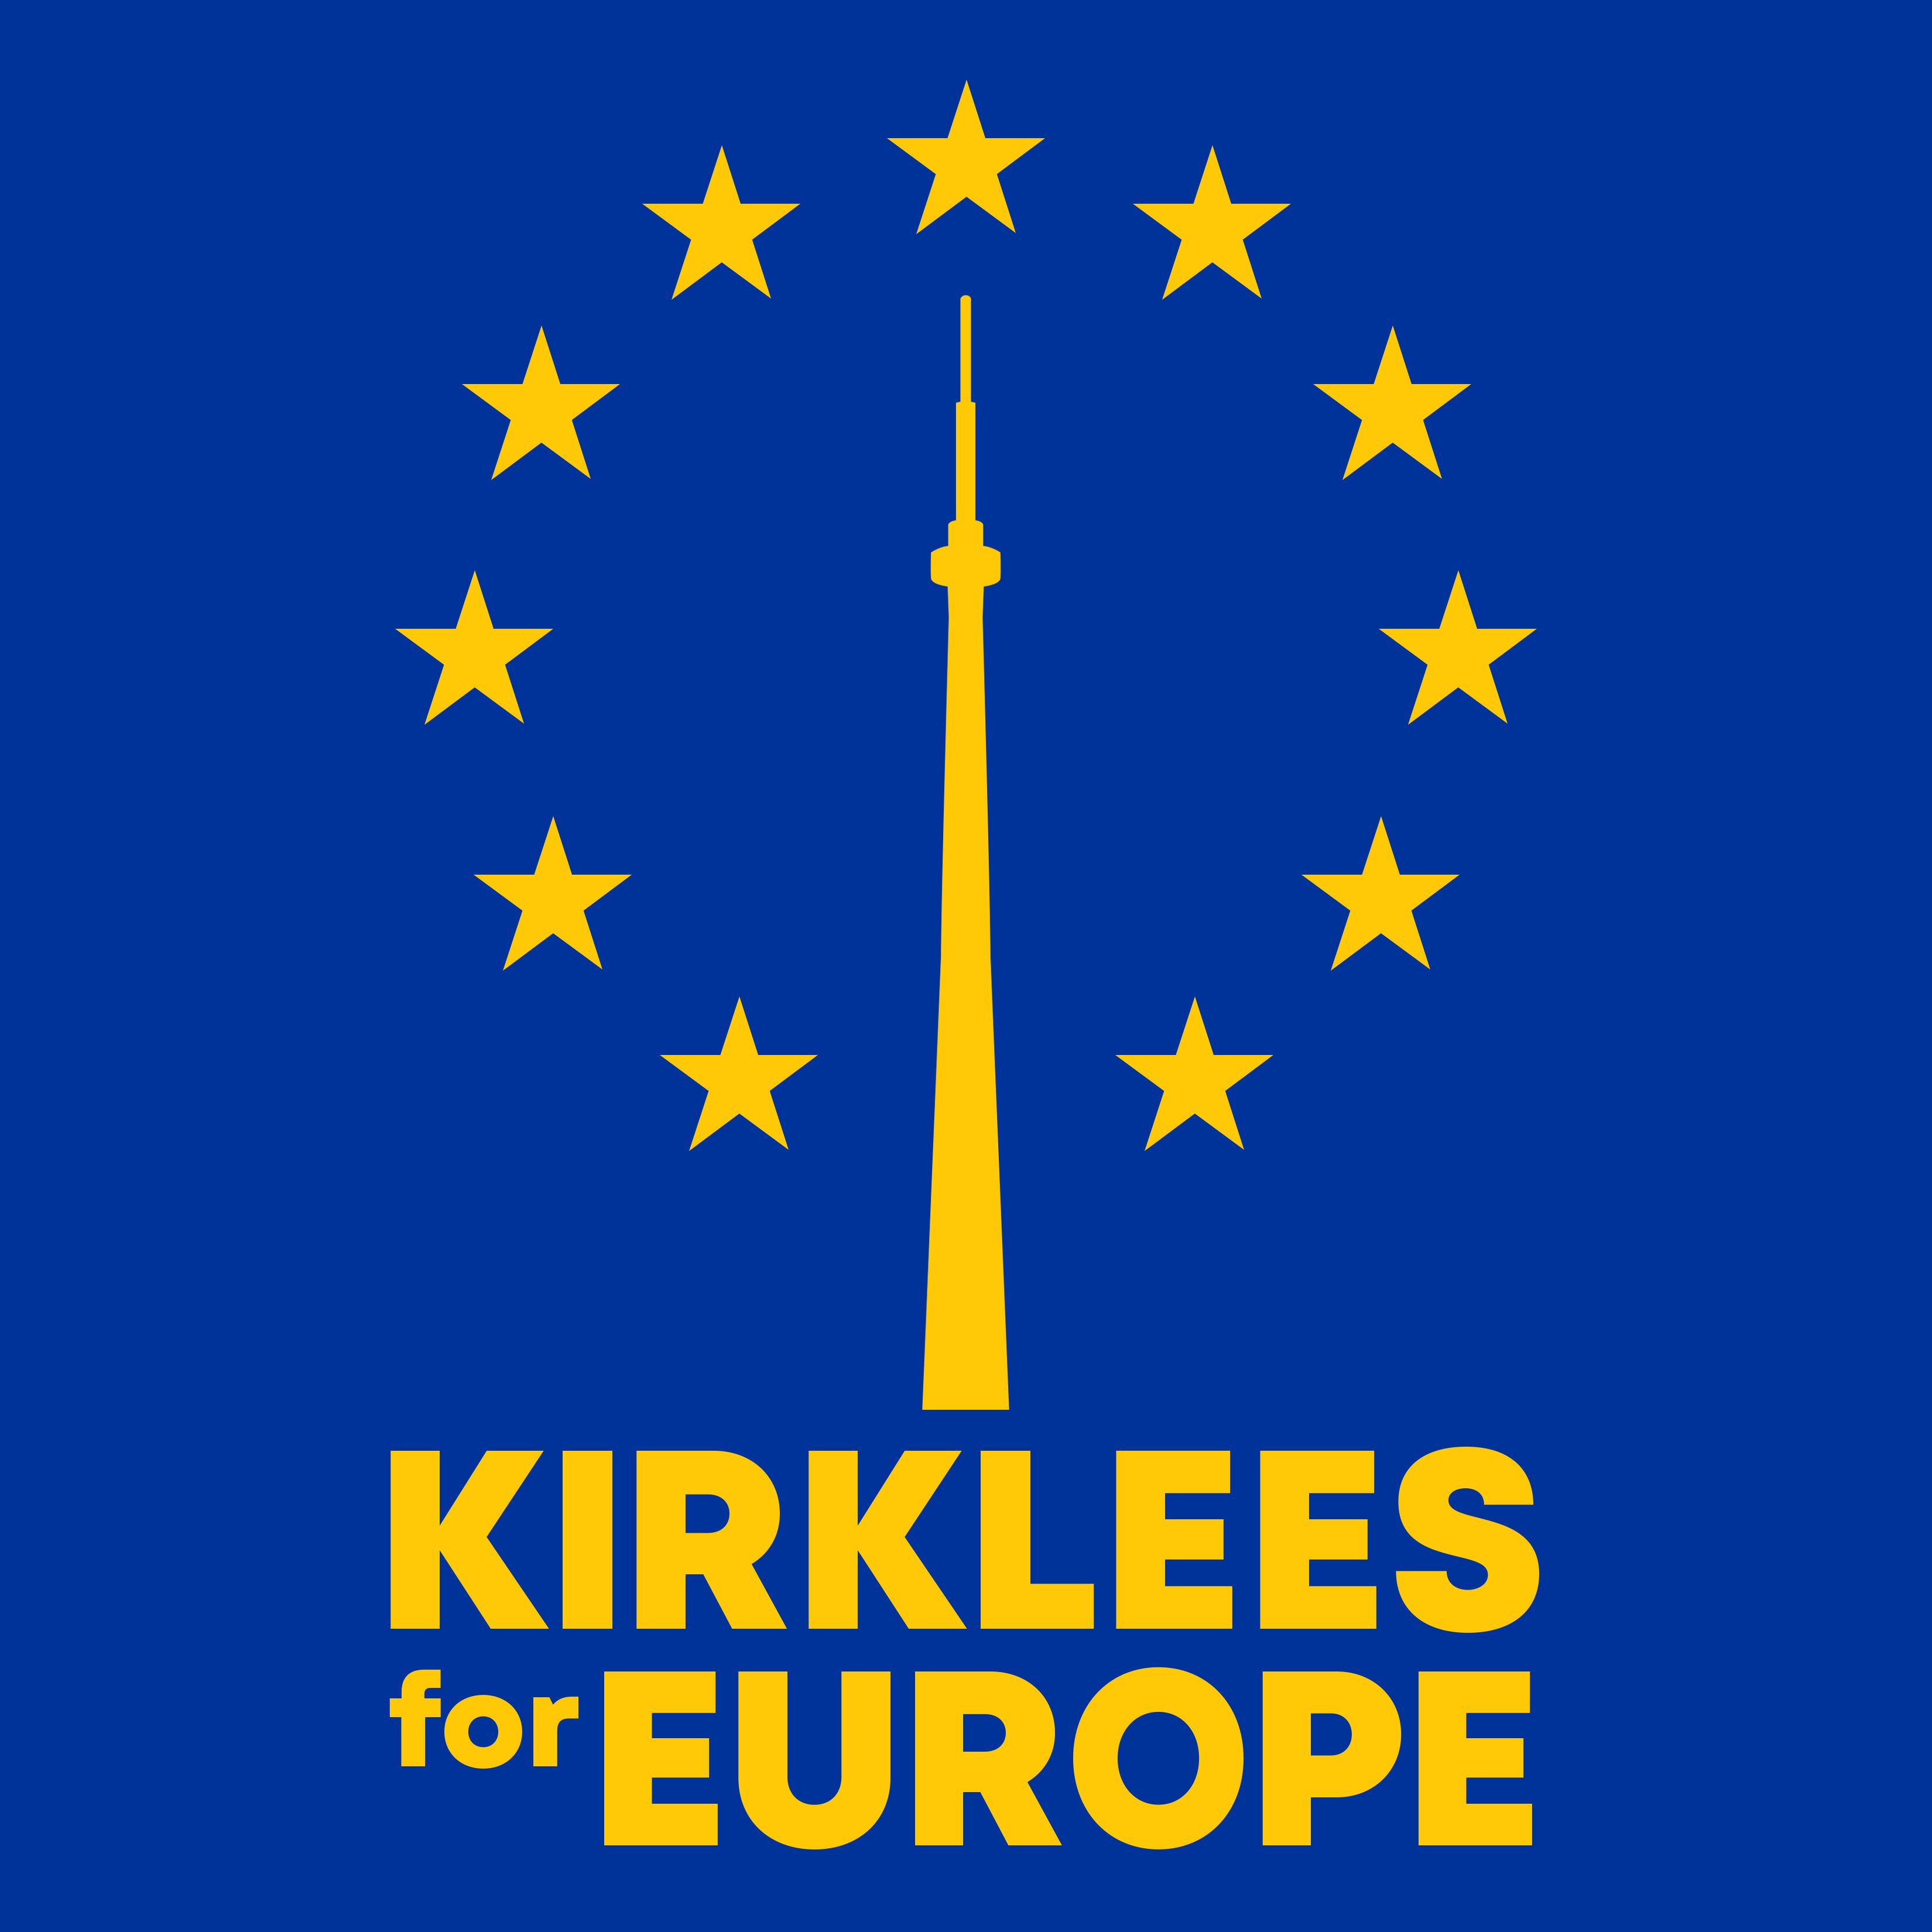 A grassroots community in Kirklees actively campaigning for the UK to remain a full member of the EU